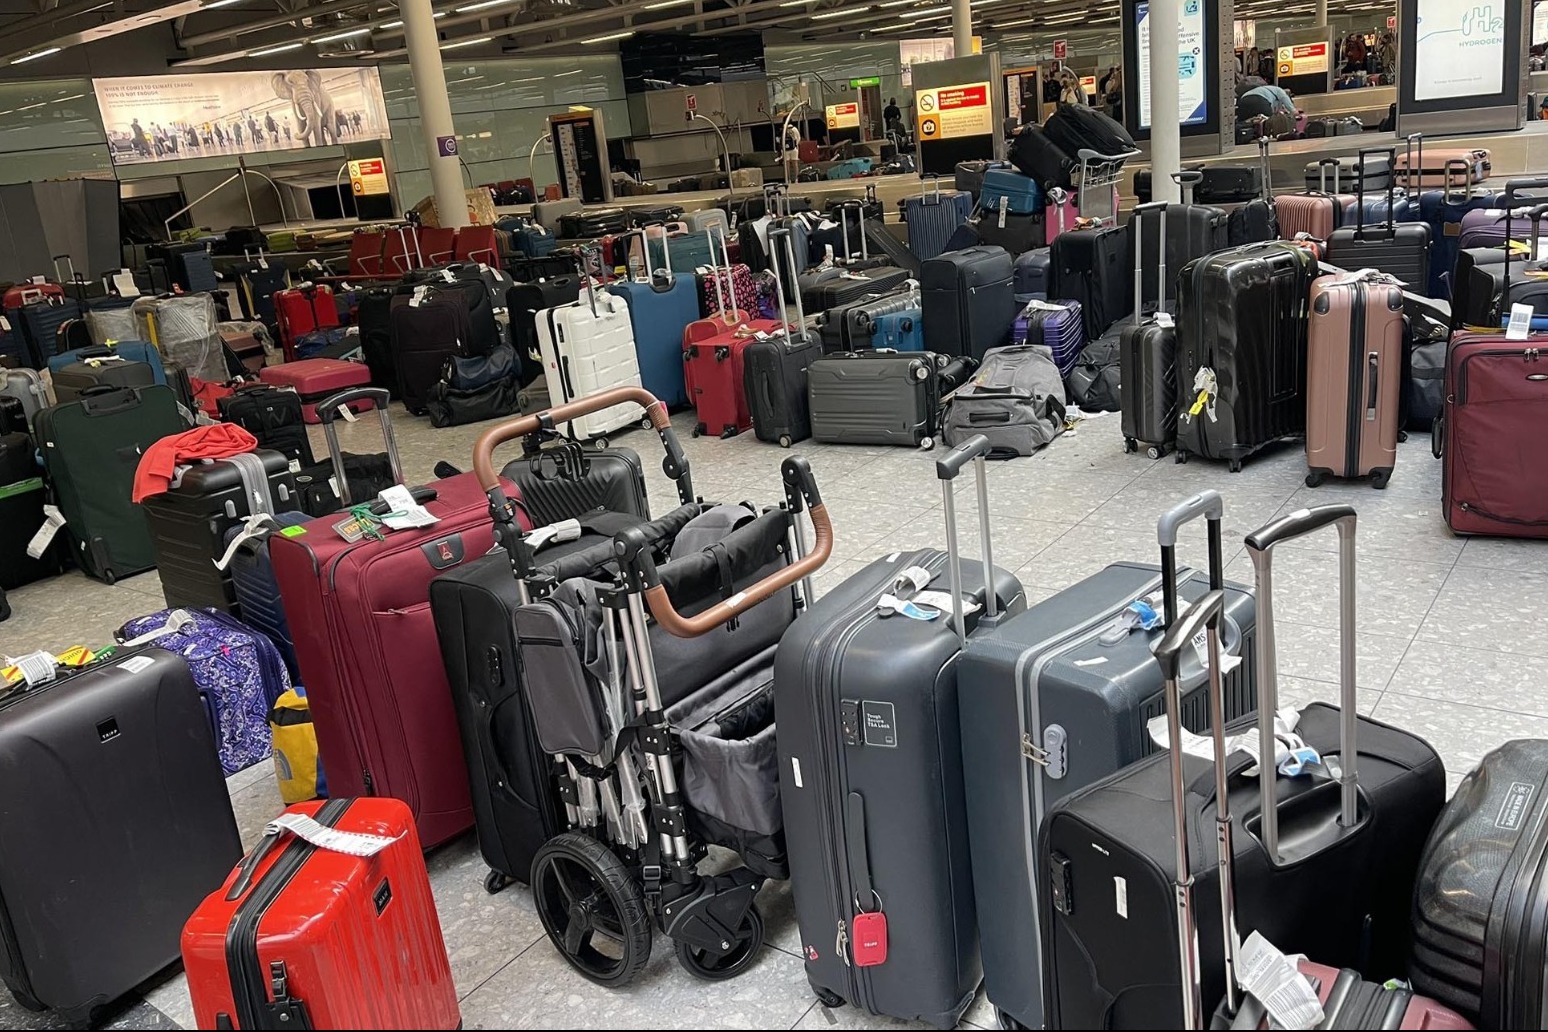 BA and Heathrow welcome ‘slot amnesty’ as summer schedule deadline approaches 